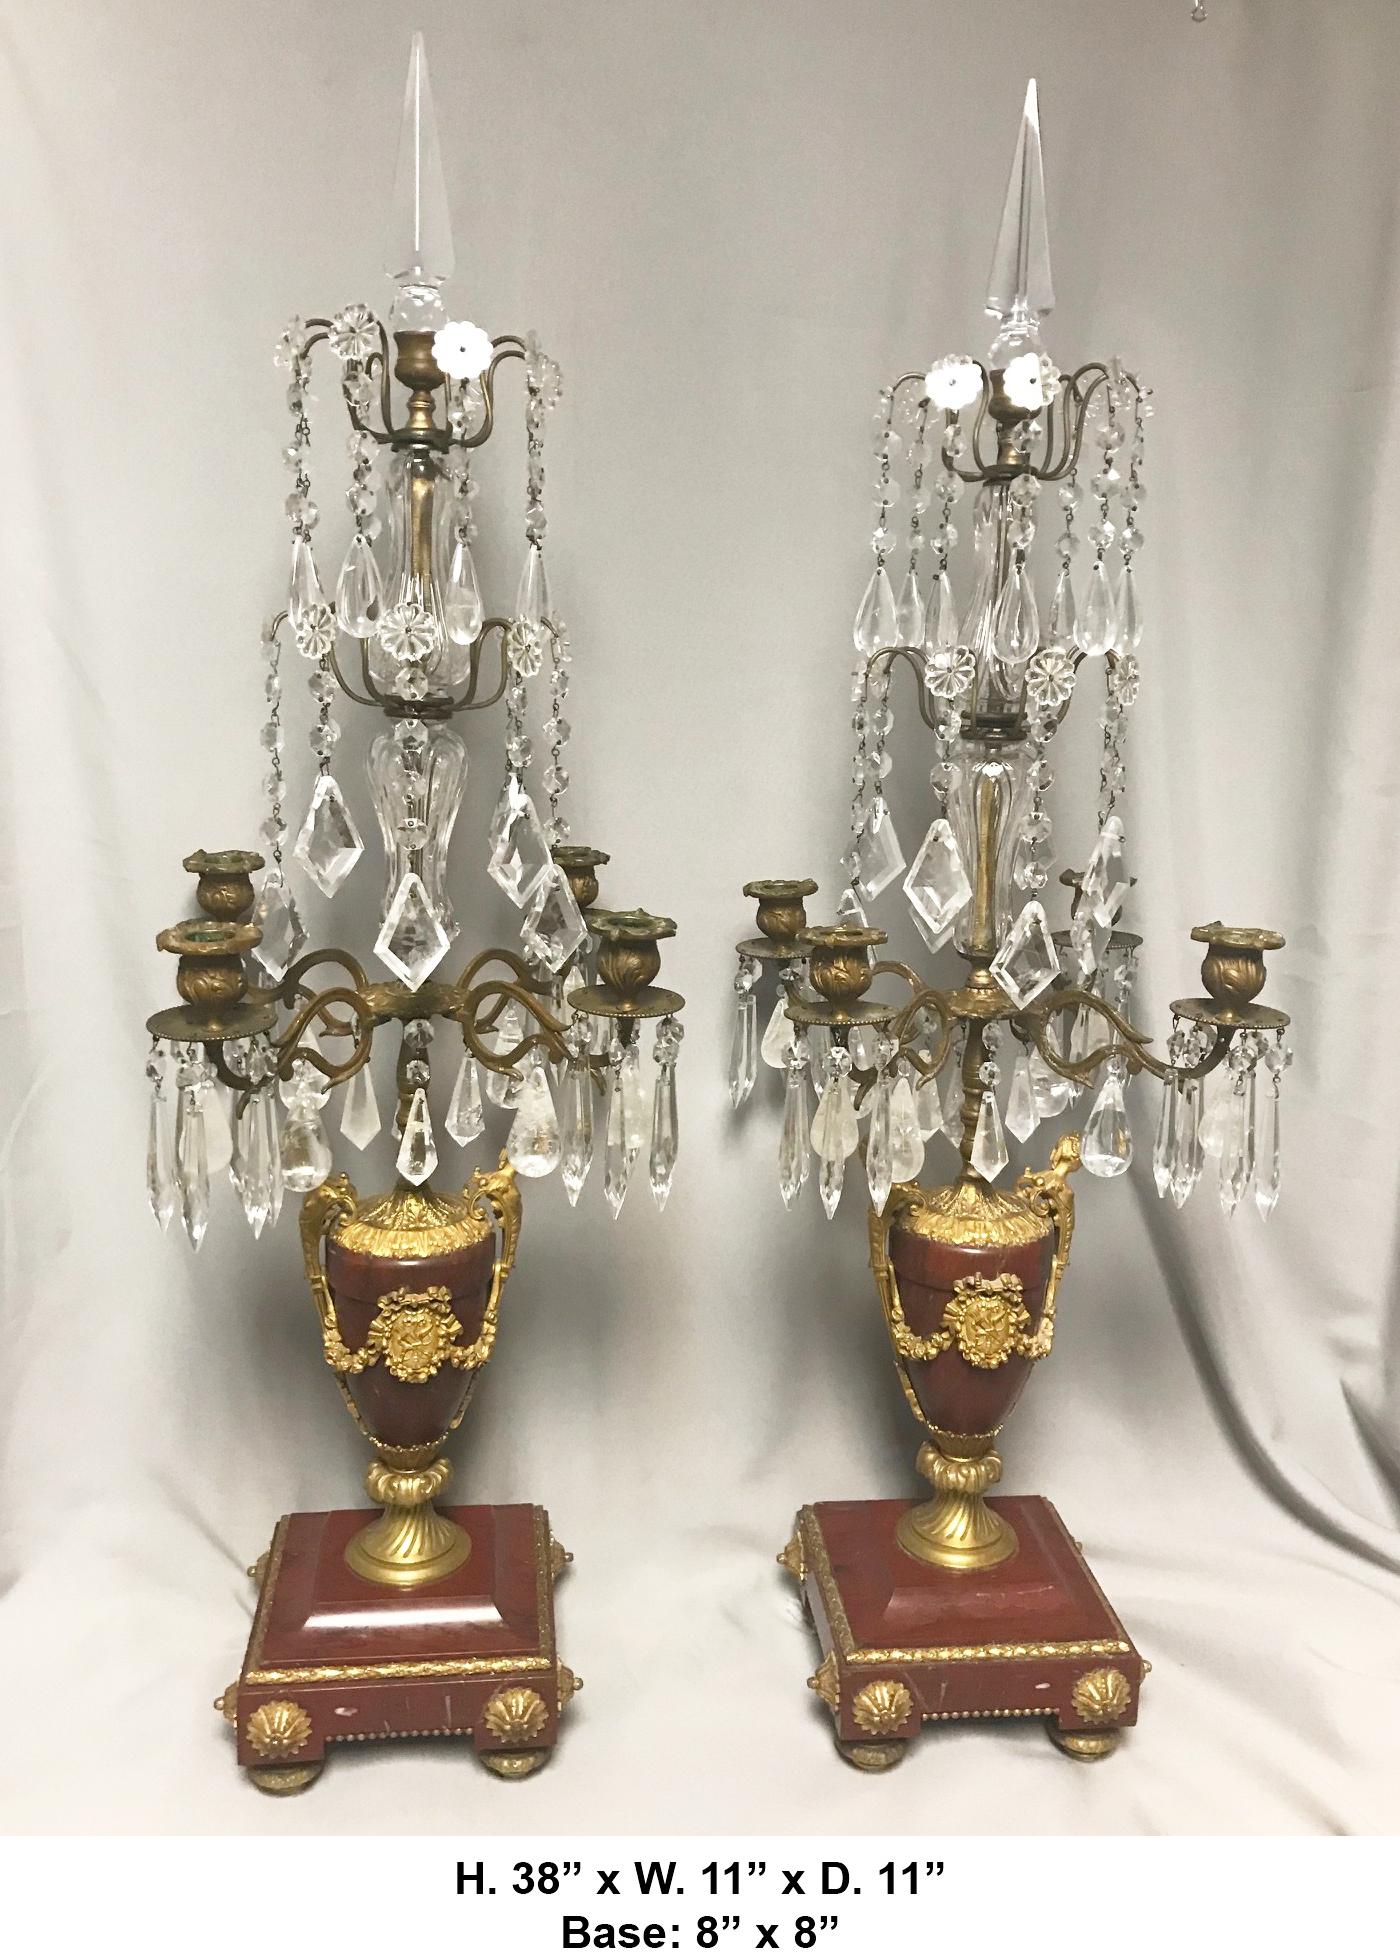 Extremely fine pair of 19th century French Louis XVI style ormolu mounted rouge marble four-light girandole lamps.

The beautiful girandoles are surmounted by a cut crystal spike, above two tiers of cut crystal prisms and adorned with Rock Crystal